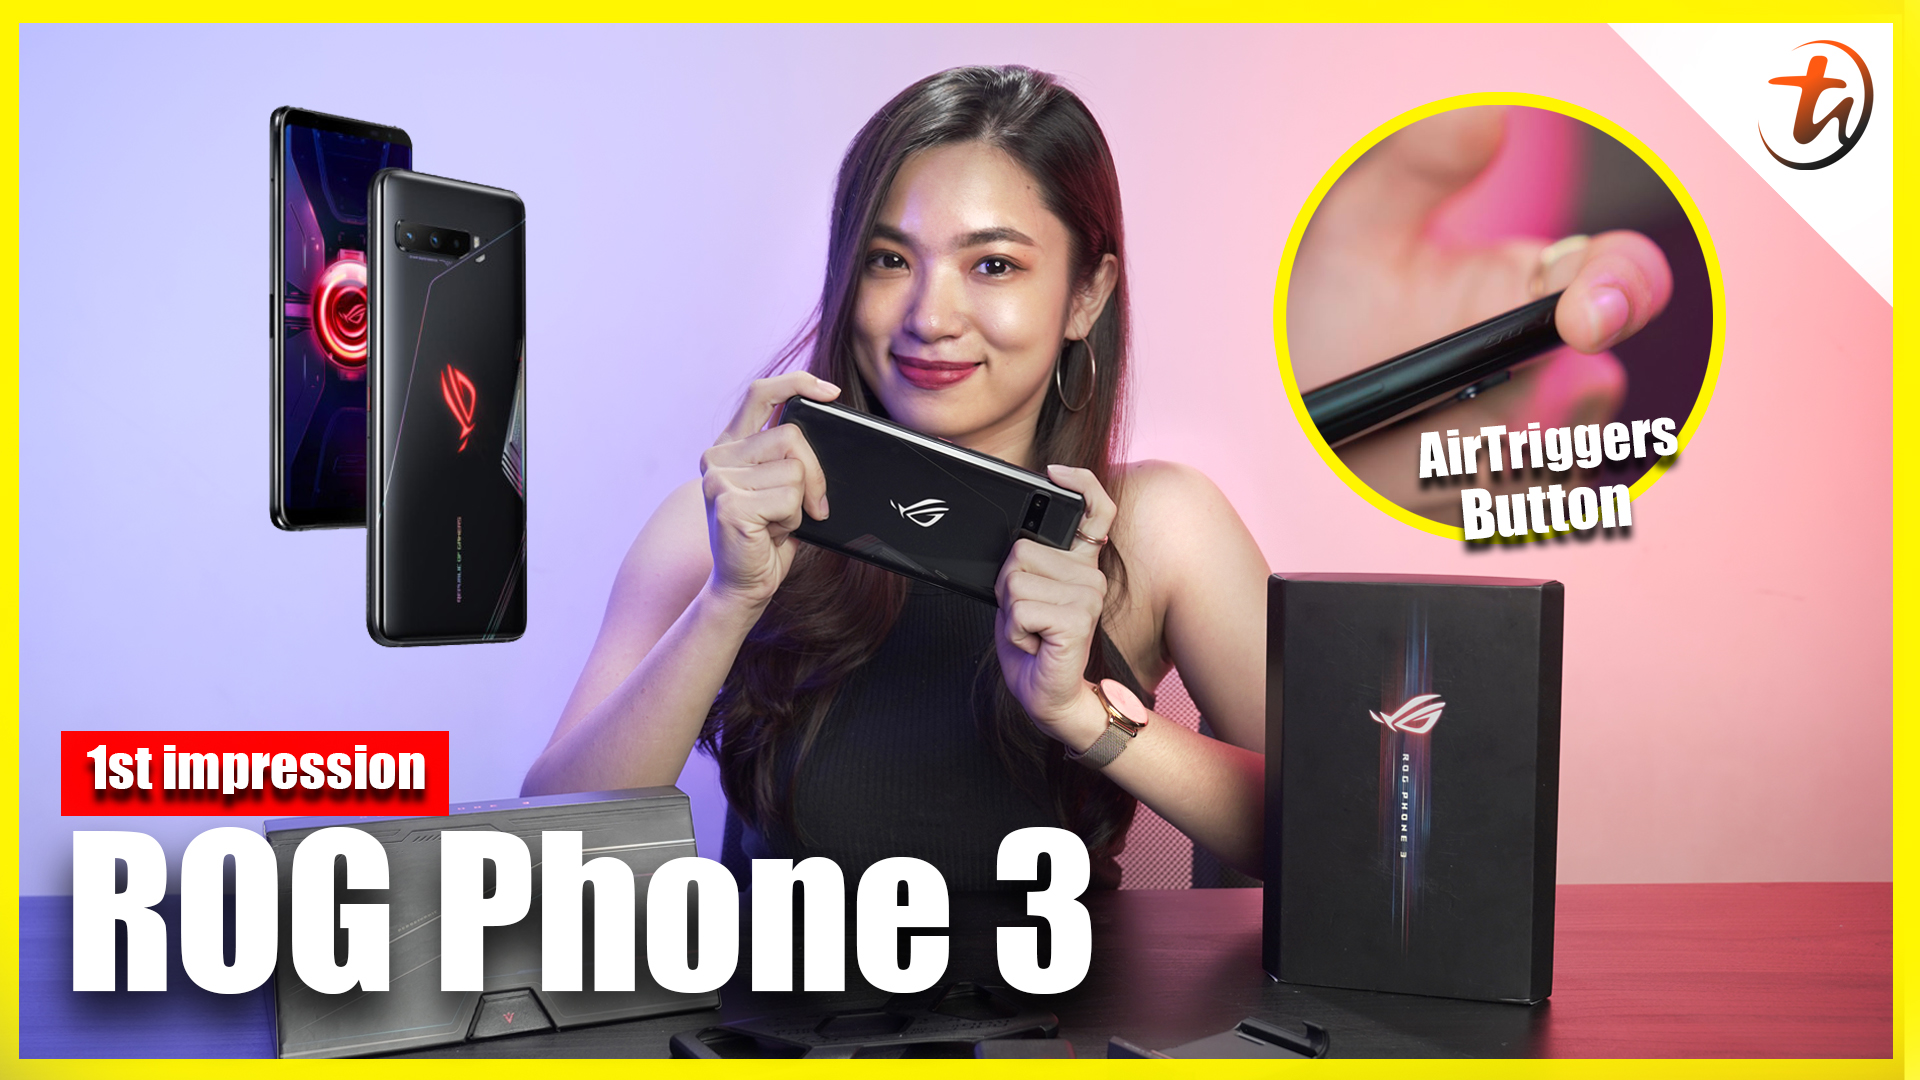 ASUS ROG Phone 3 Unboxing and Hands-On: Snapdragon 865+chipset and a 144Hz AMOLED display!